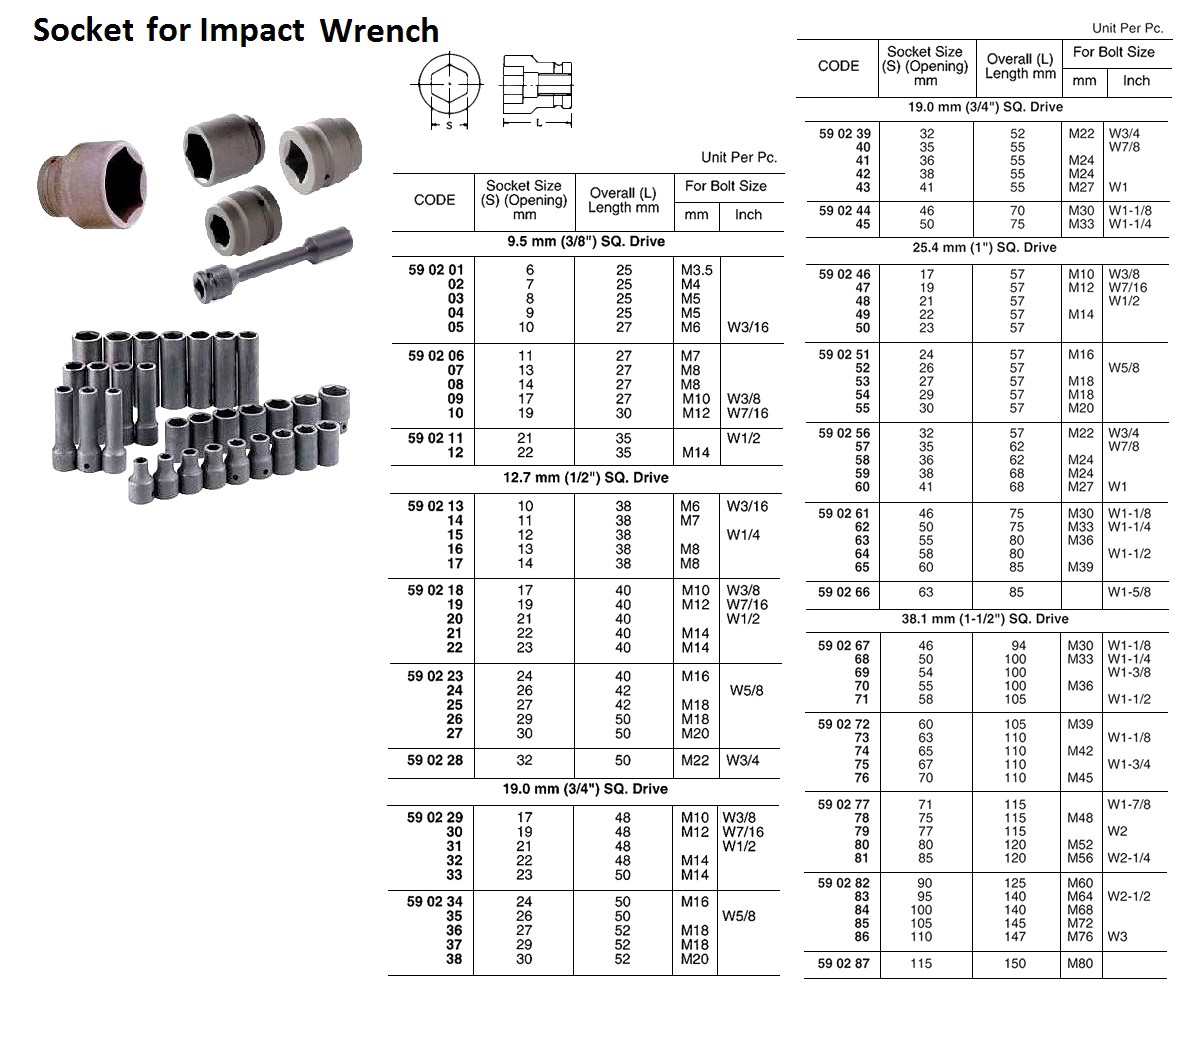 590246-590266 SOCKET FOR IMPACT WRENCH, 25.4MM/SQ DR.